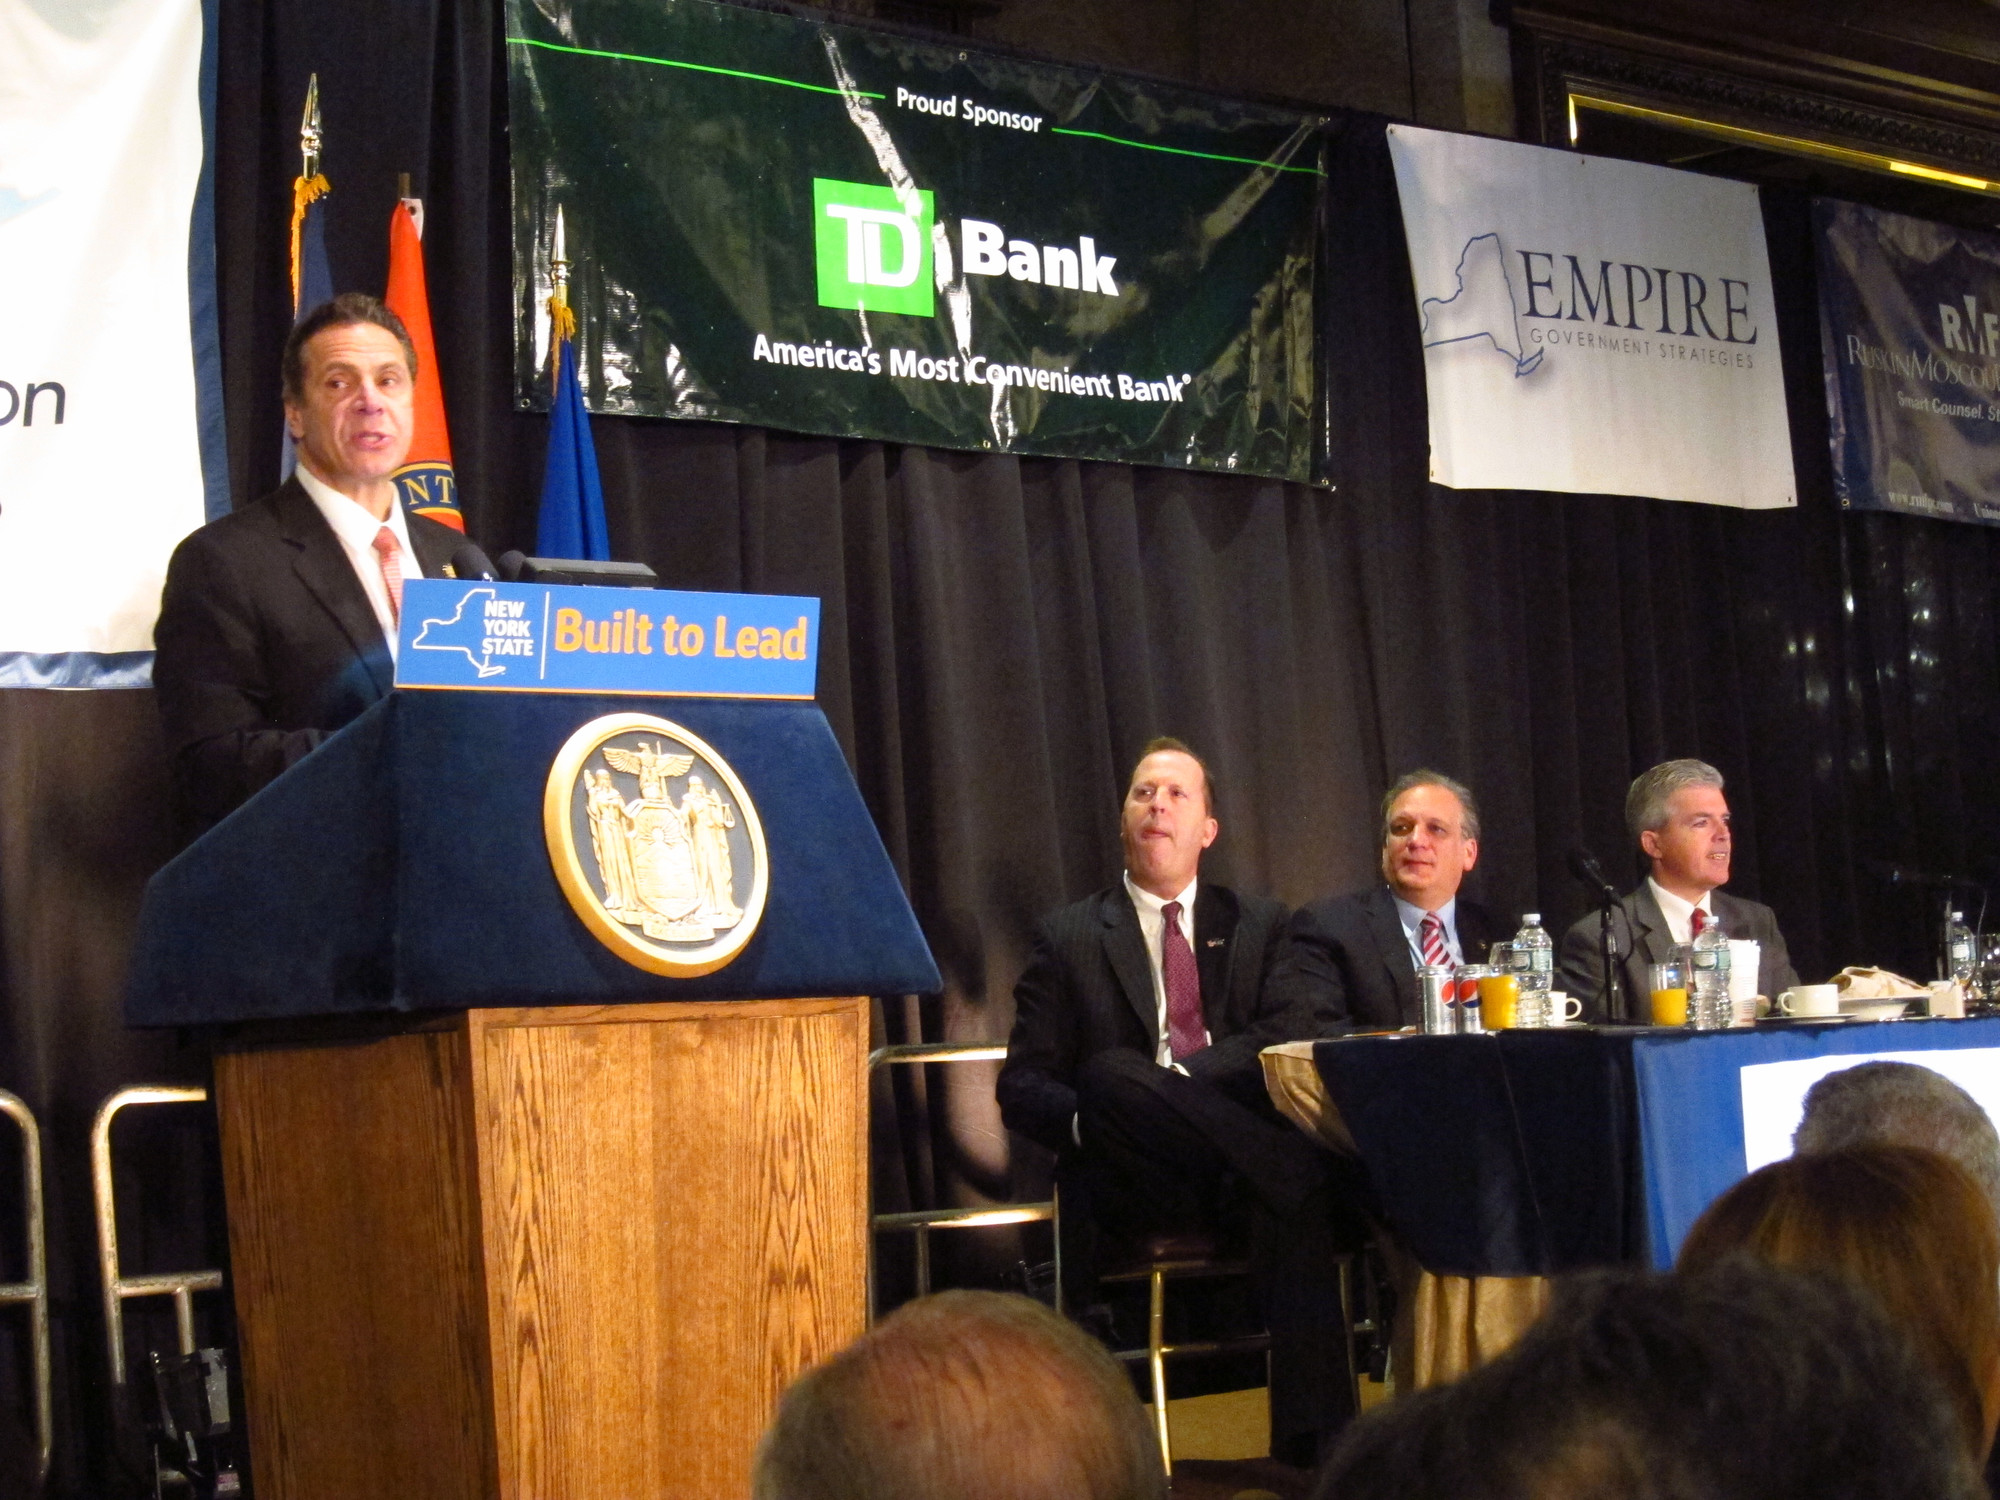 Gov. Andrew Cuomo outlined plans for 2016, as Long Island Association president Kevin Law, left, Nassau County Executive Ed Mangano, center, and Suffolk County Executive Steve Bellone listened.